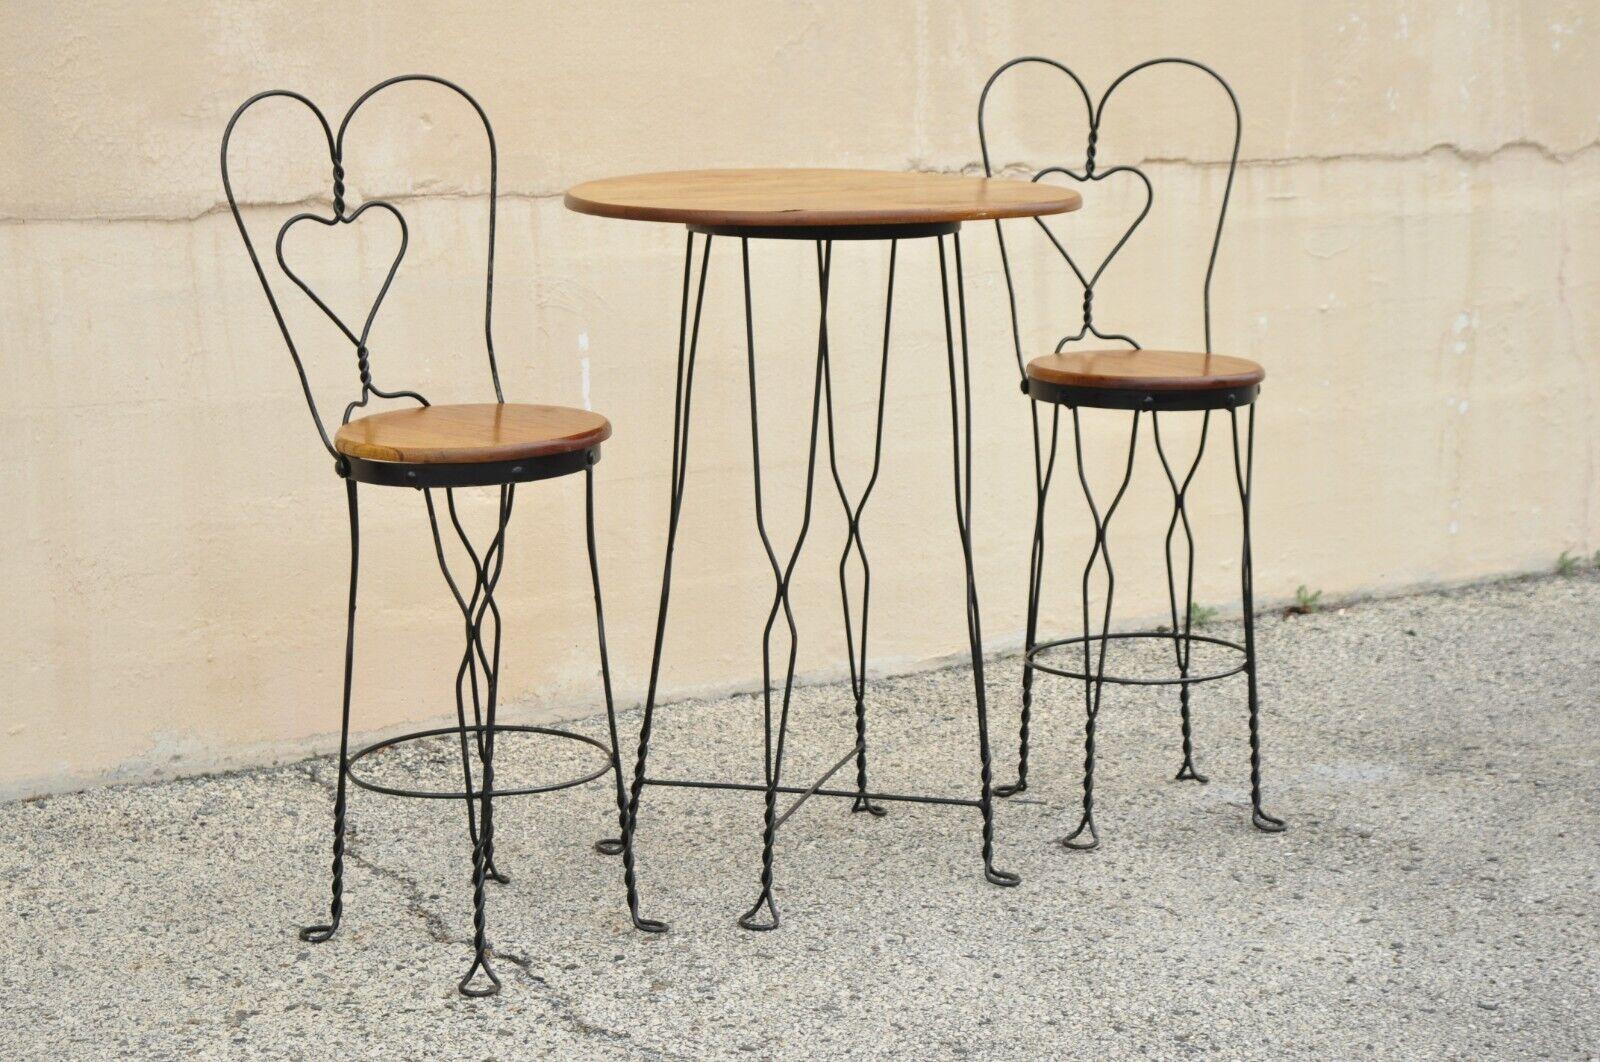 Vintage Ice Cream Parlor Bistro Dining Set Tall Table & Chairs Victorian Style - 3pc Set. Item features (1) round bistro dining table, (2) stools, wrought iron frame, wooden table top and seats, great style and form. Circa Mid to late 20th